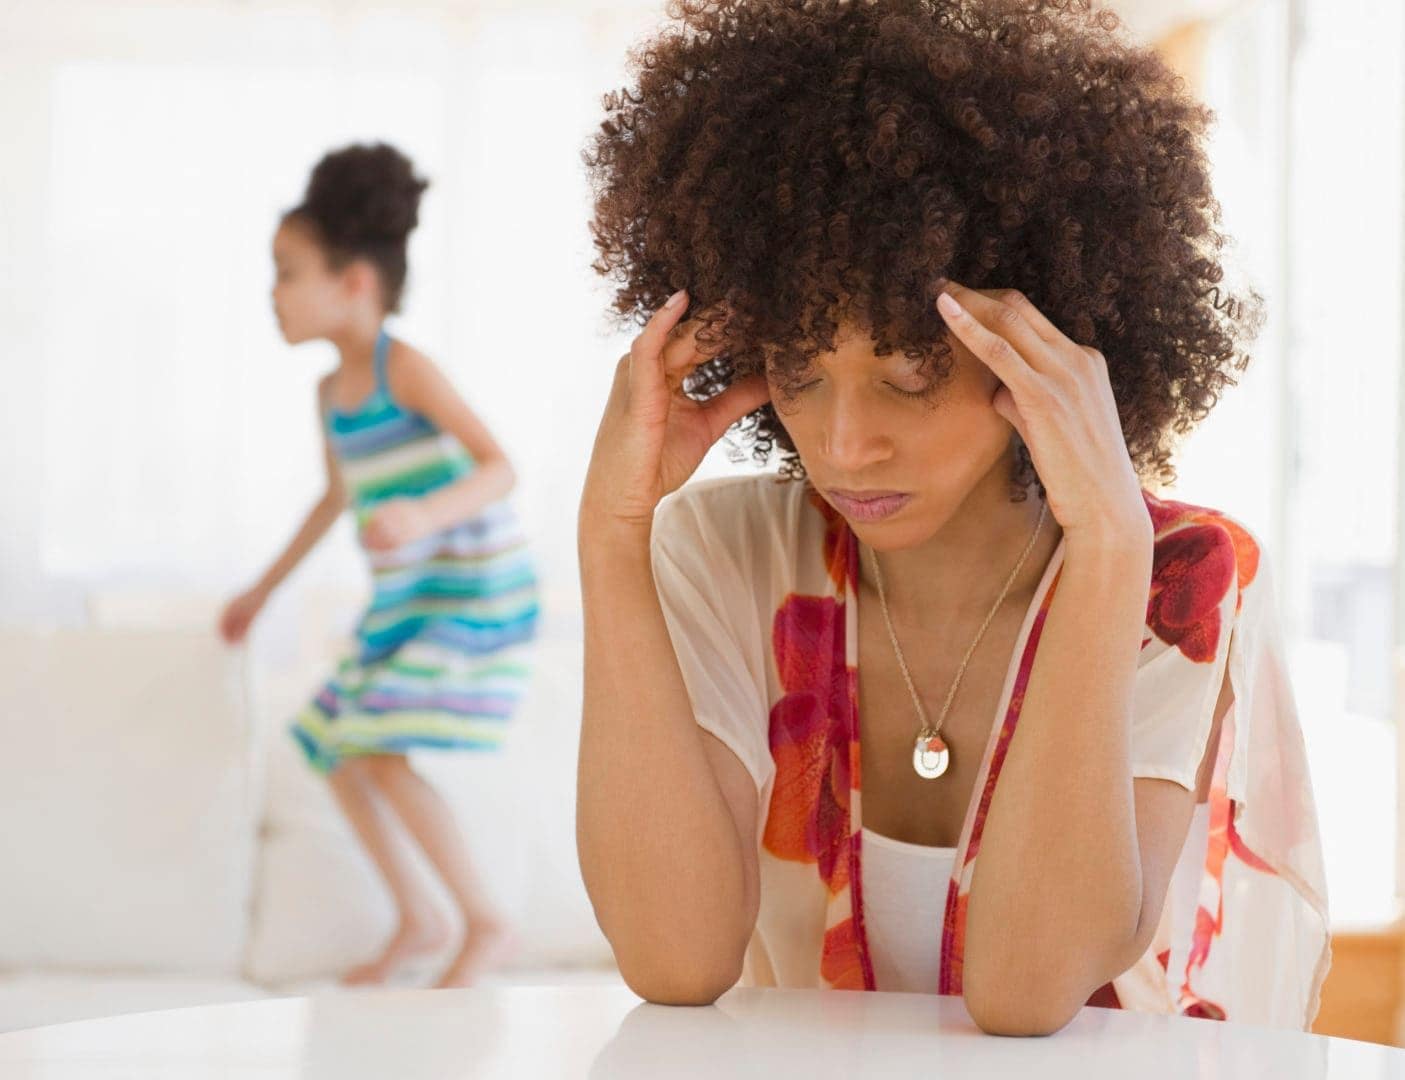 Parents: 11 things to do when you’re stressed